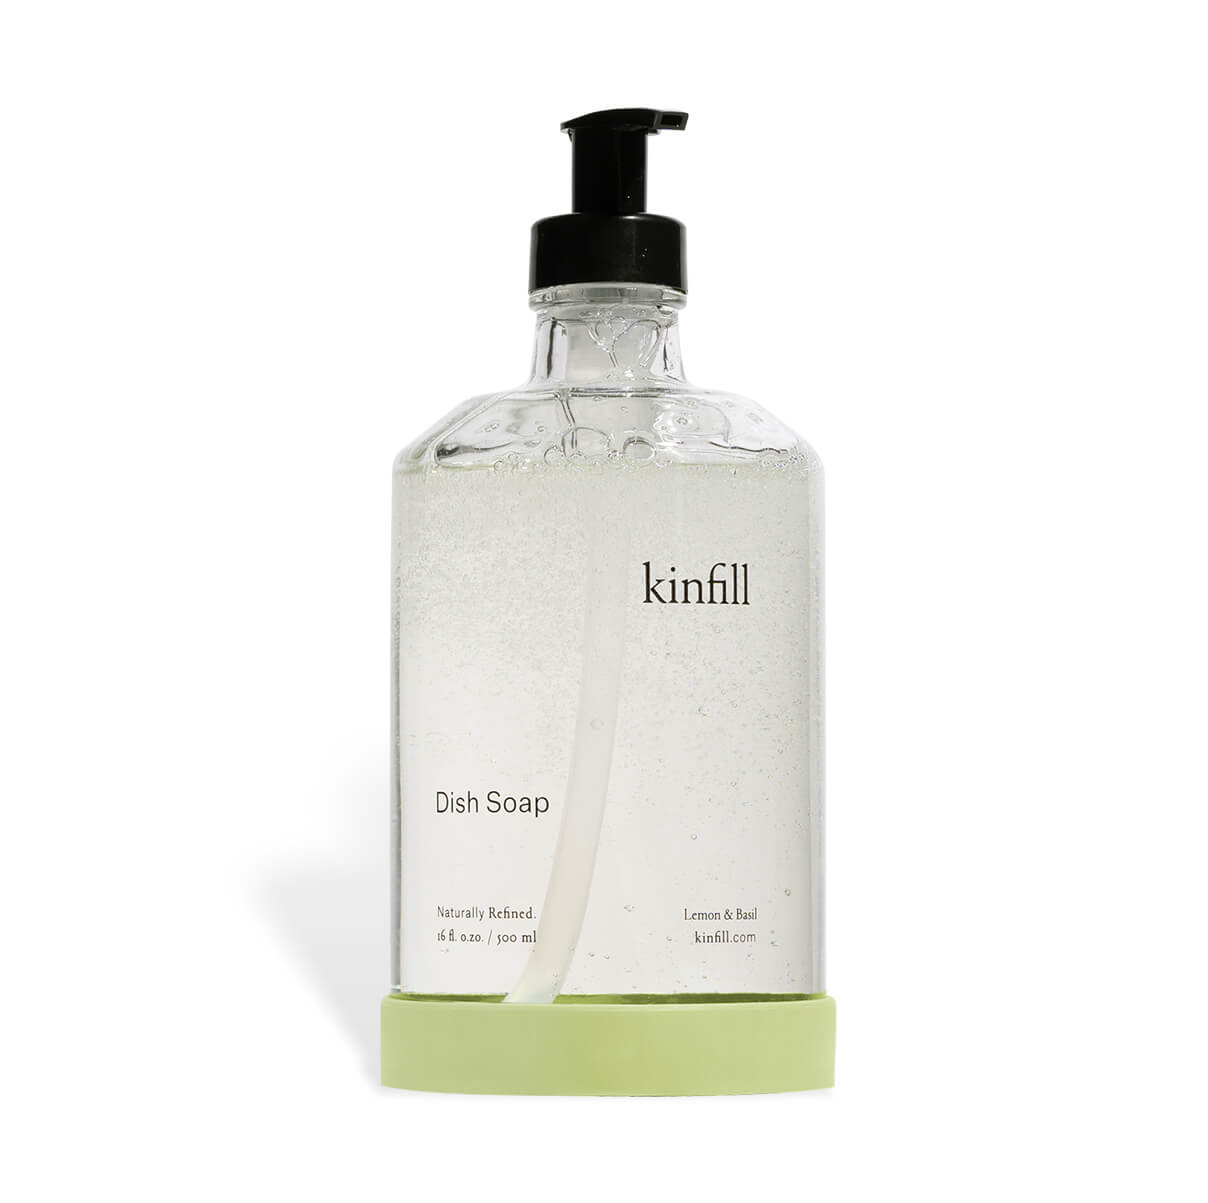 DISH SOAP STARTER KIT by Kinfill